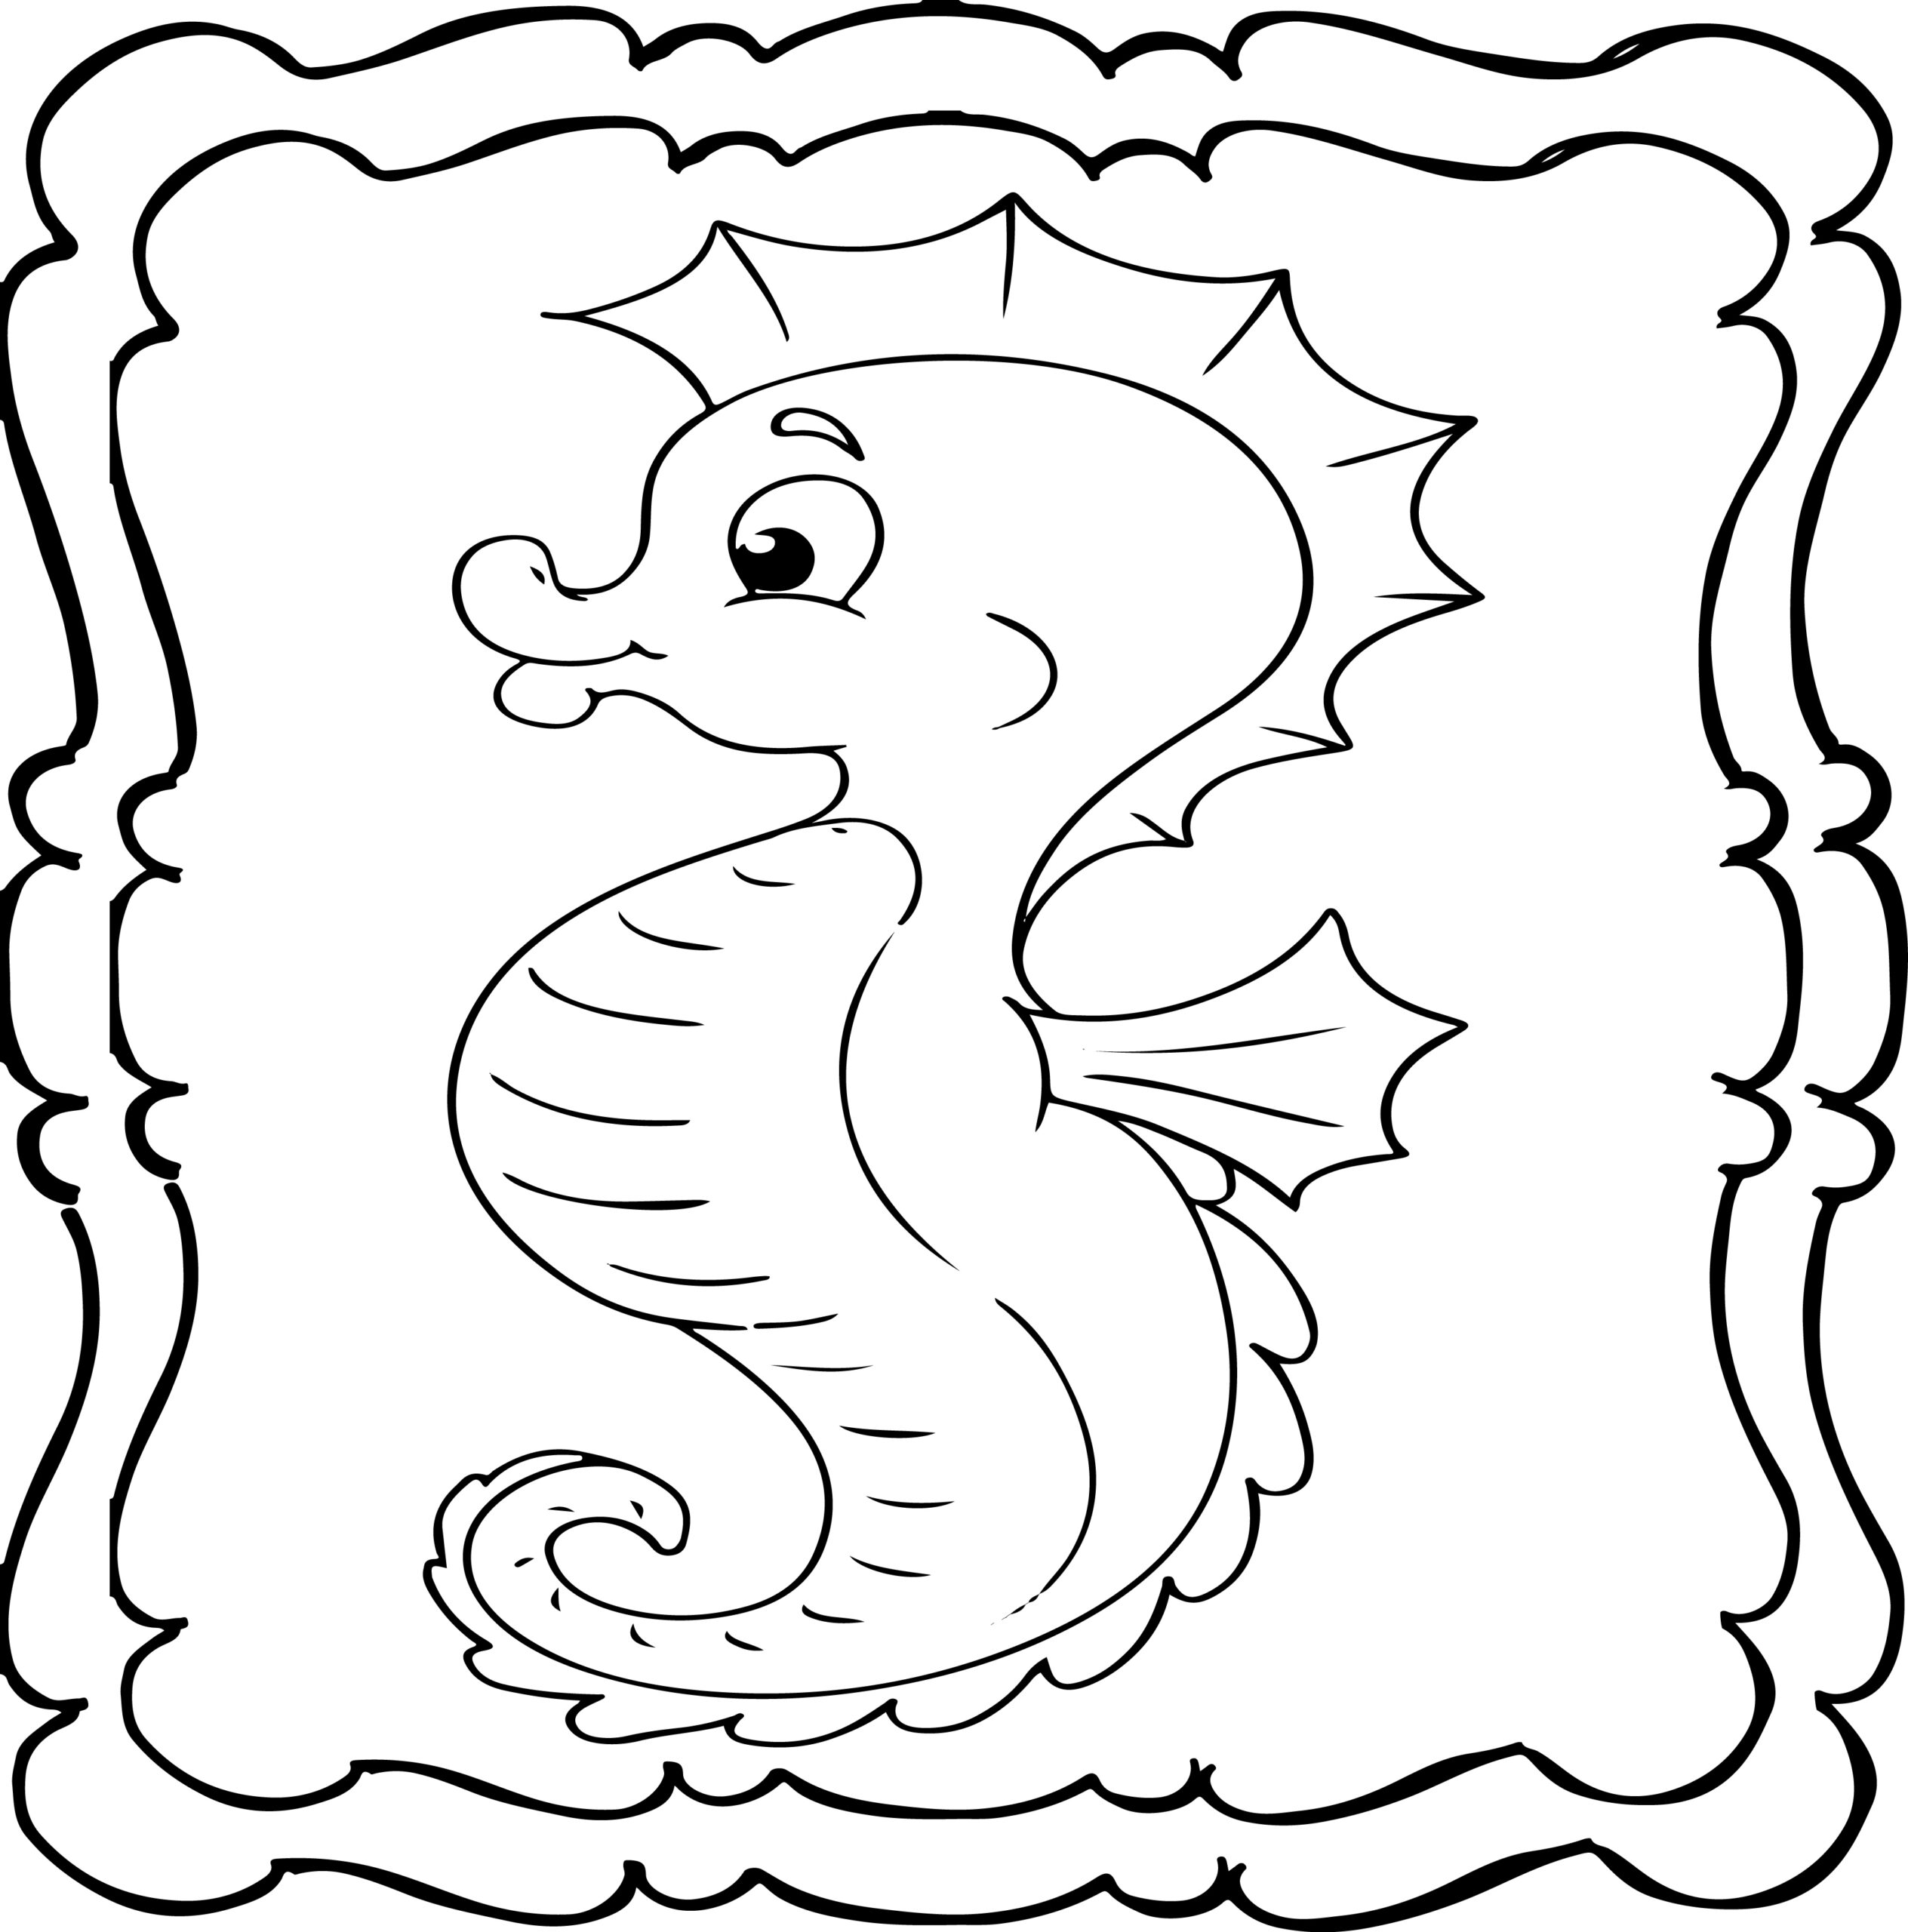 Seahorse coloring book easy and fun seahorses coloring book for kids made by teachers